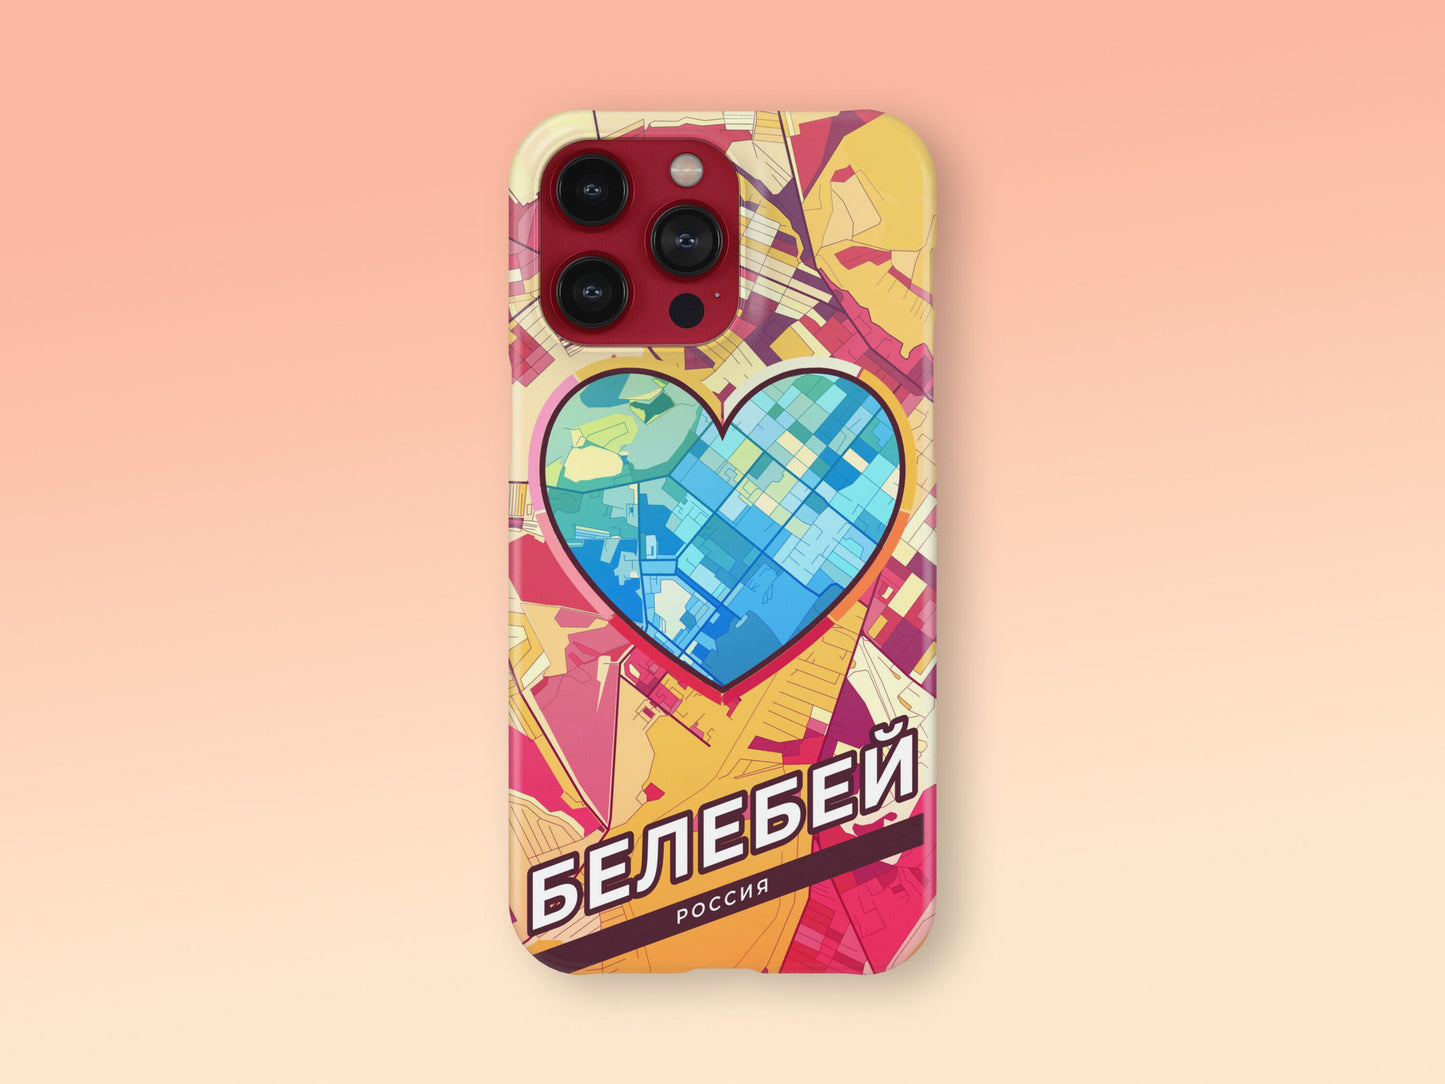 Belebey Russia slim phone case with colorful icon. Birthday, wedding or housewarming gift. Couple match cases. 2